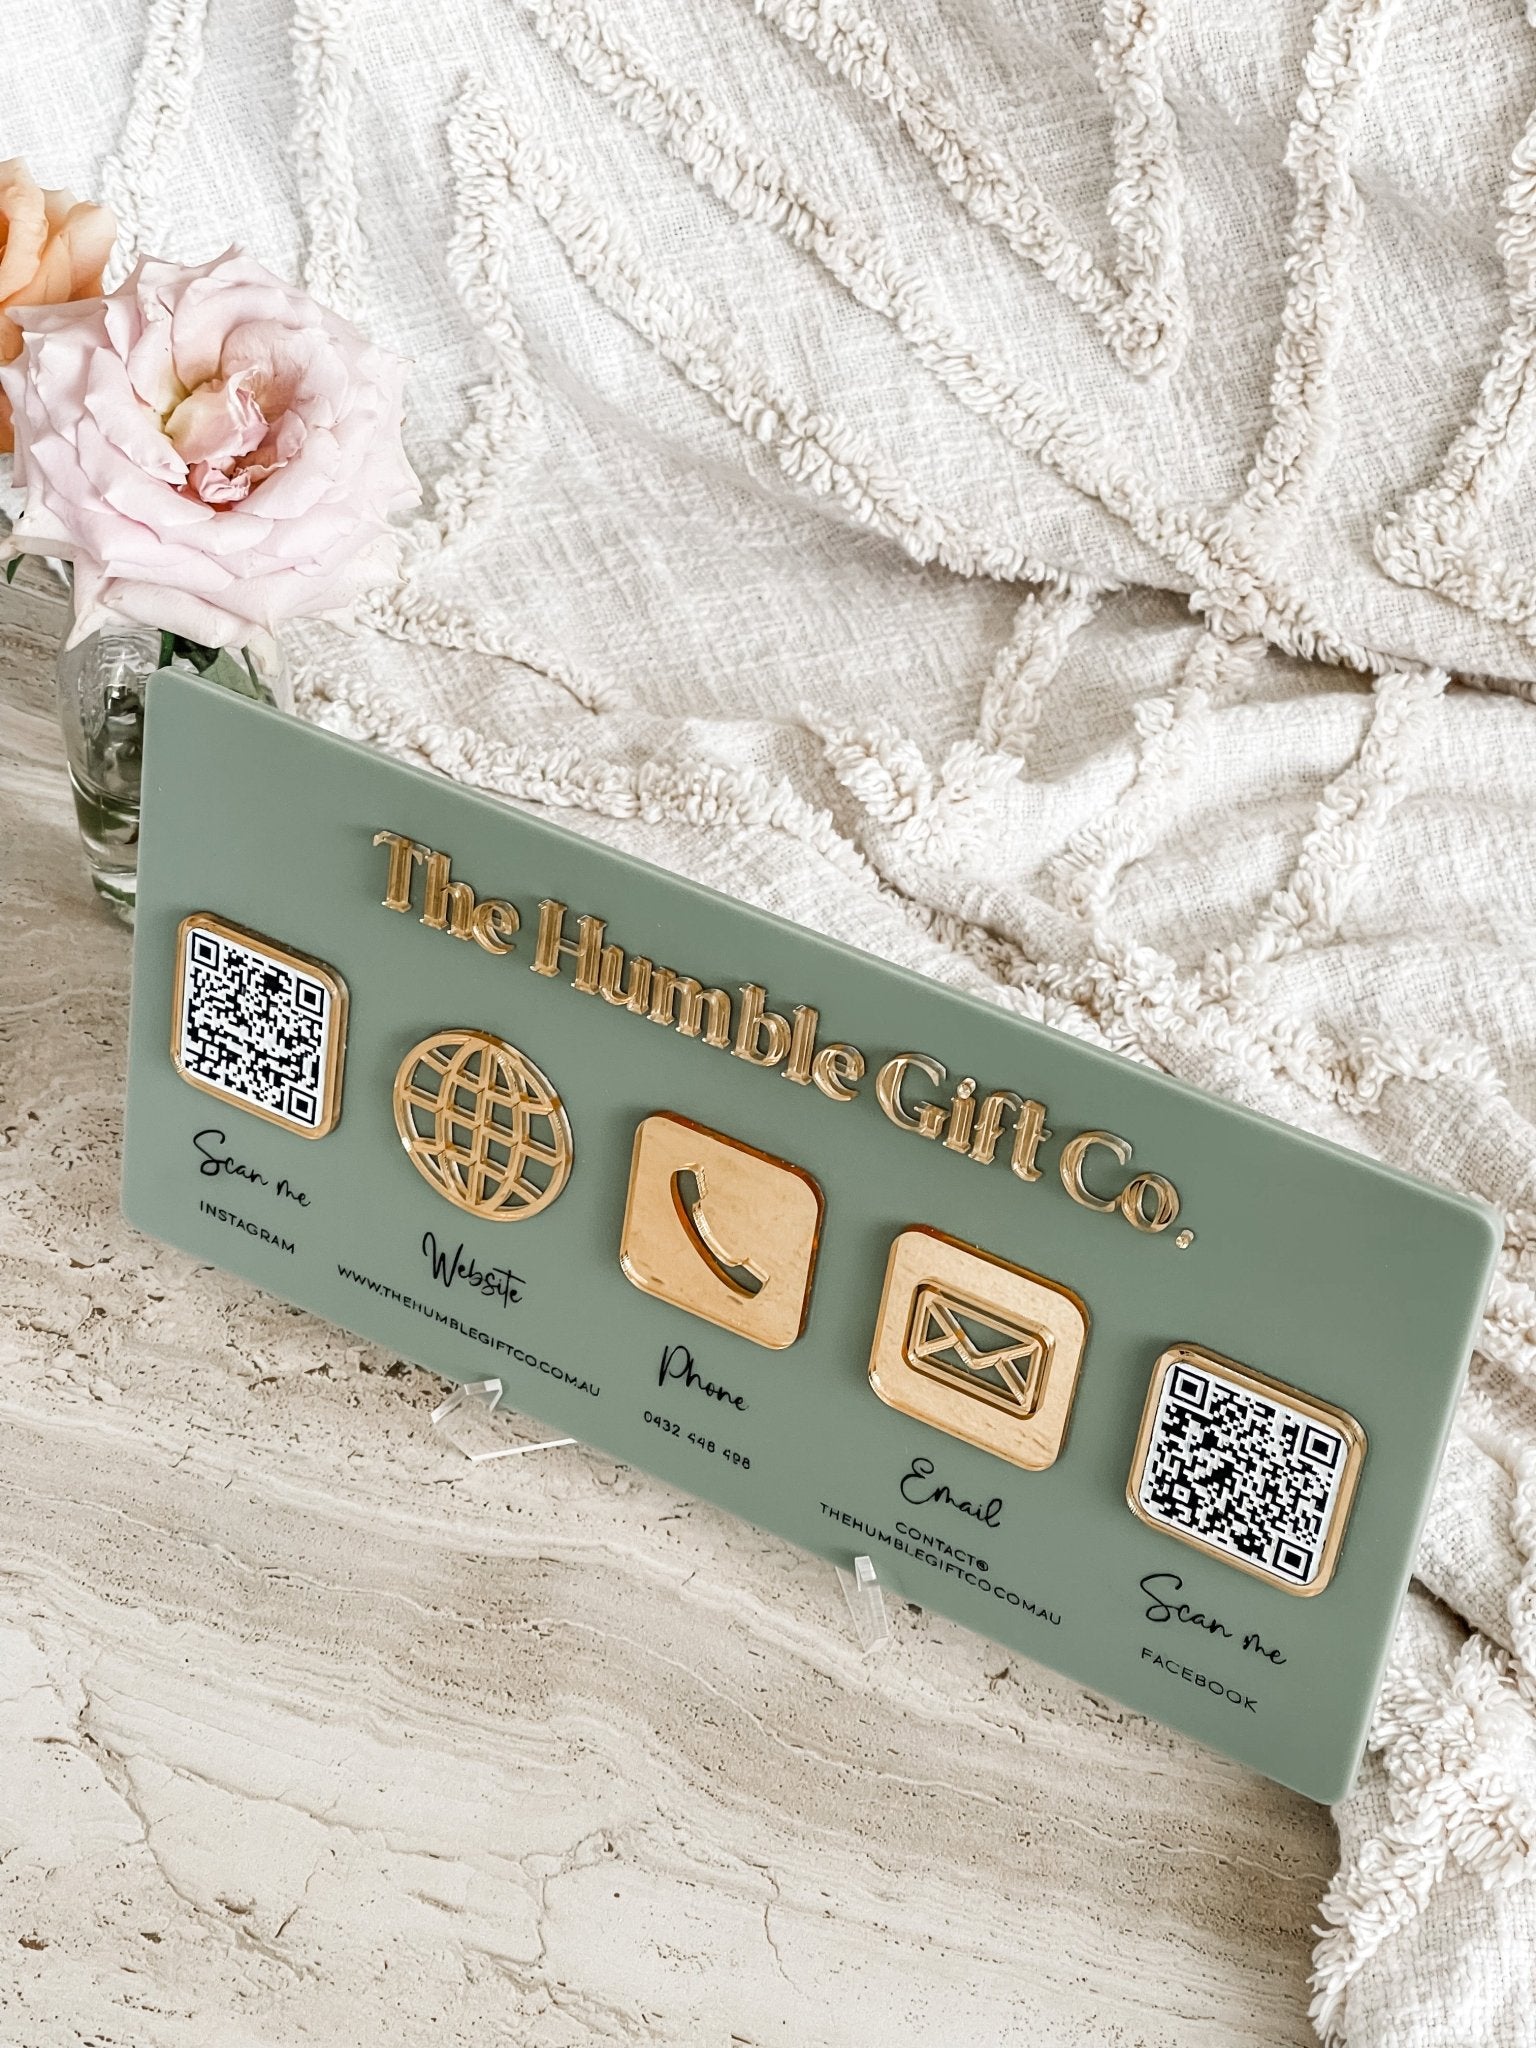 Social Media Sign - The Humble Gift Co.